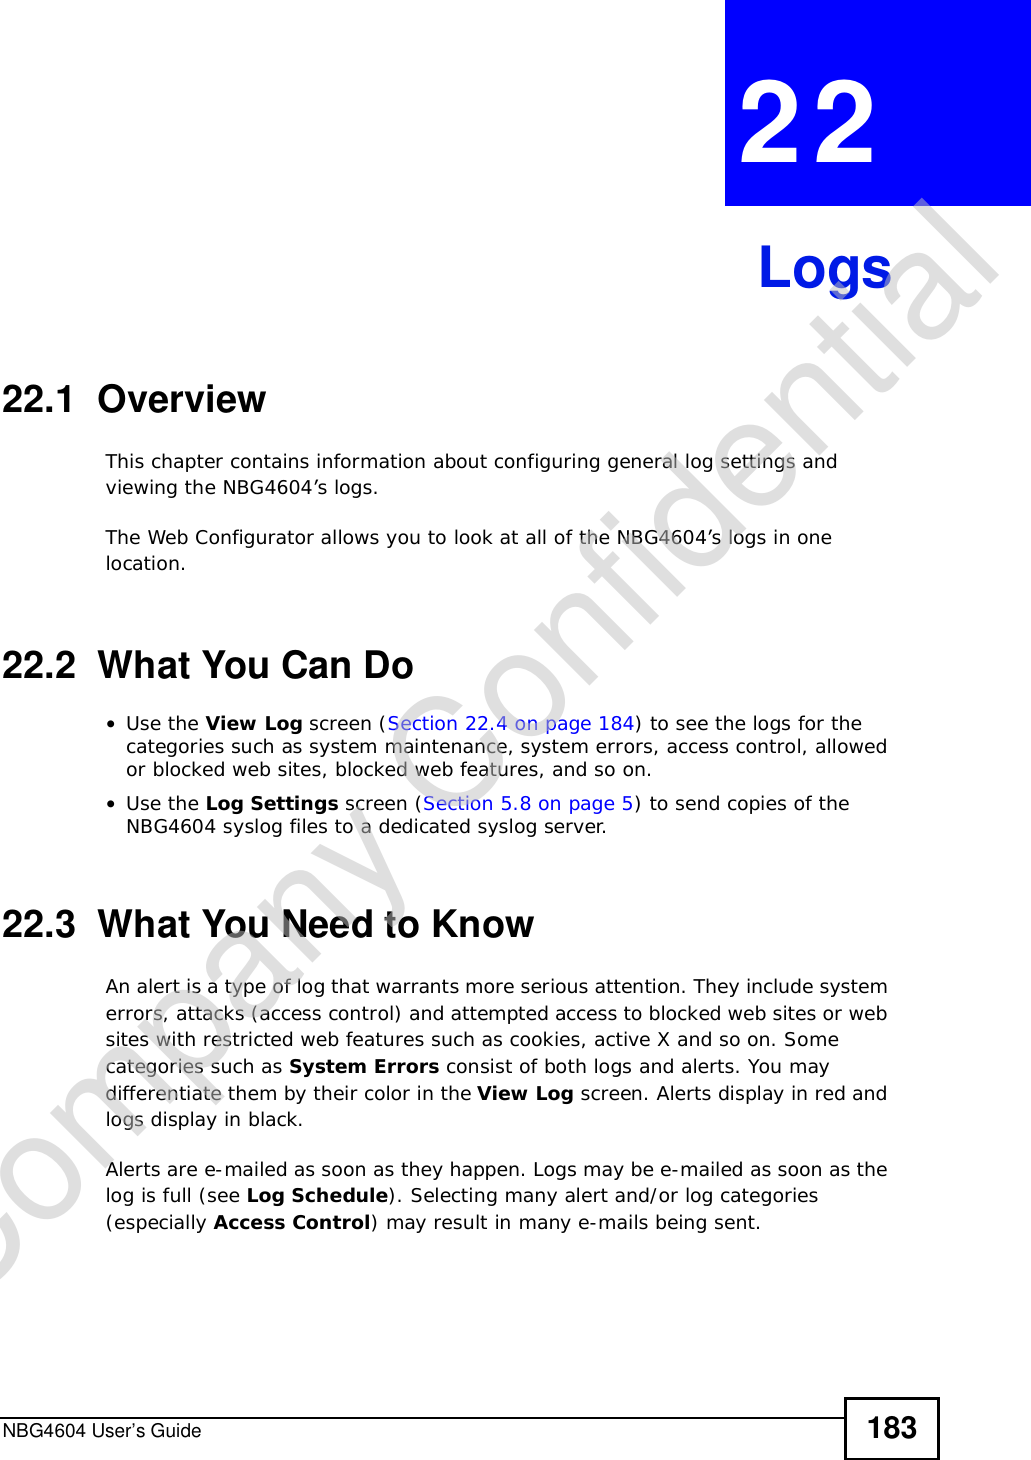 NBG4604 User’s Guide 183CHAPTER 22Logs22.1  OverviewThis chapter contains information about configuring general log settings and viewing the NBG4604’s logs. The Web Configurator allows you to look at all of the NBG4604’s logs in one location. 22.2  What You Can Do•Use the View Log screen (Section 22.4 on page 184) to see the logs for the categories such as system maintenance, system errors, access control, allowed or blocked web sites, blocked web features, and so on.•Use the Log Settings screen (Section 5.8 on page 5) to send copies of the NBG4604 syslog files to a dedicated syslog server.22.3  What You Need to KnowAn alert is a type of log that warrants more serious attention. They include system errors, attacks (access control) and attempted access to blocked web sites or web sites with restricted web features such as cookies, active X and so on. Some categories such as System Errors consist of both logs and alerts. You may differentiate them by their color in the View Log screen. Alerts display in red and logs display in black.Alerts are e-mailed as soon as they happen. Logs may be e-mailed as soon as the log is full (see Log Schedule). Selecting many alert and/or log categories (especially Access Control) may result in many e-mails being sent.Company Confidential